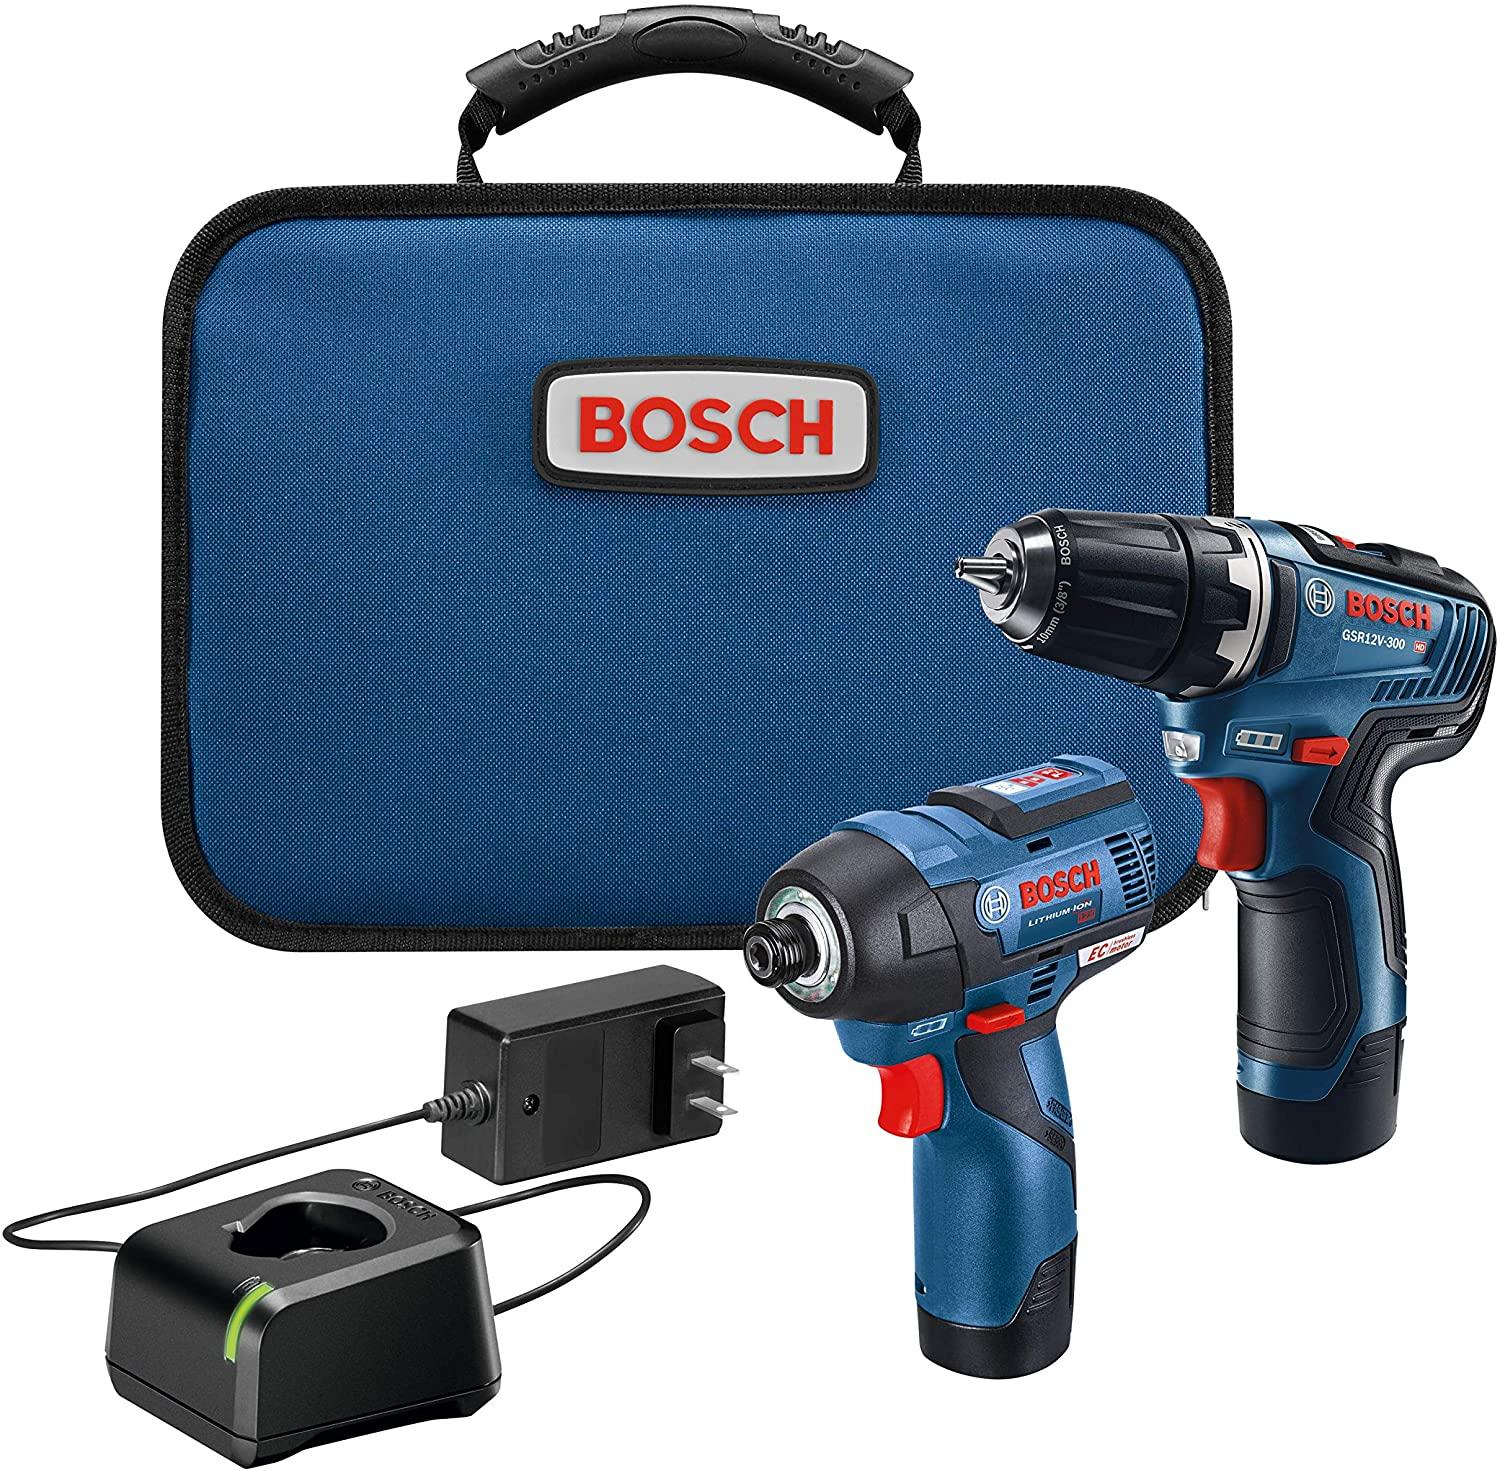 Bosch 12V Max 2-Tool Brushless Drill Driver Combo Kit for $139.30 Shipped